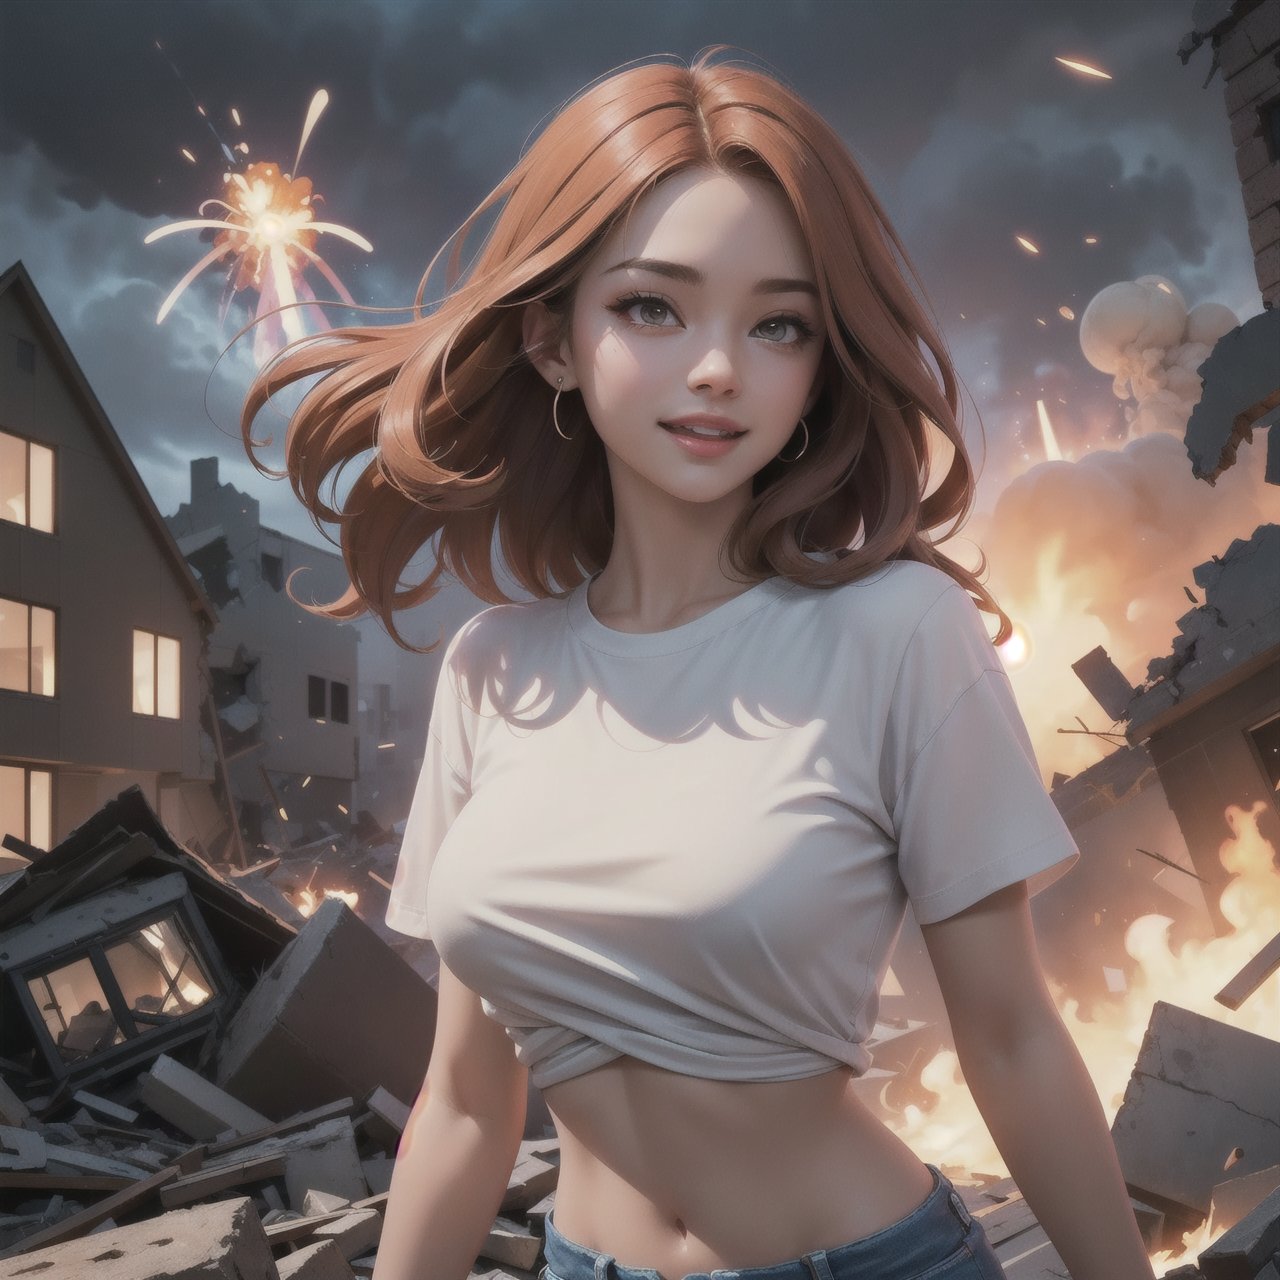 (masterpiece, best quality:1.4), (beautiful, aesthetic, perfect, delicate, intricate:1.2), (cinematic lighting), ((atomic explosion in background, mass destruction, collapsing buildings, disaster, nightmare, vivid colours)), (high contrast), beautiful women looking at mobile phone, skipping toward camera, tshirt, blue_jeans, navel, laughing, smiling, perfect face, eyeliner, long wavy windswept red hair, large_breasts, depth of field, under_boob